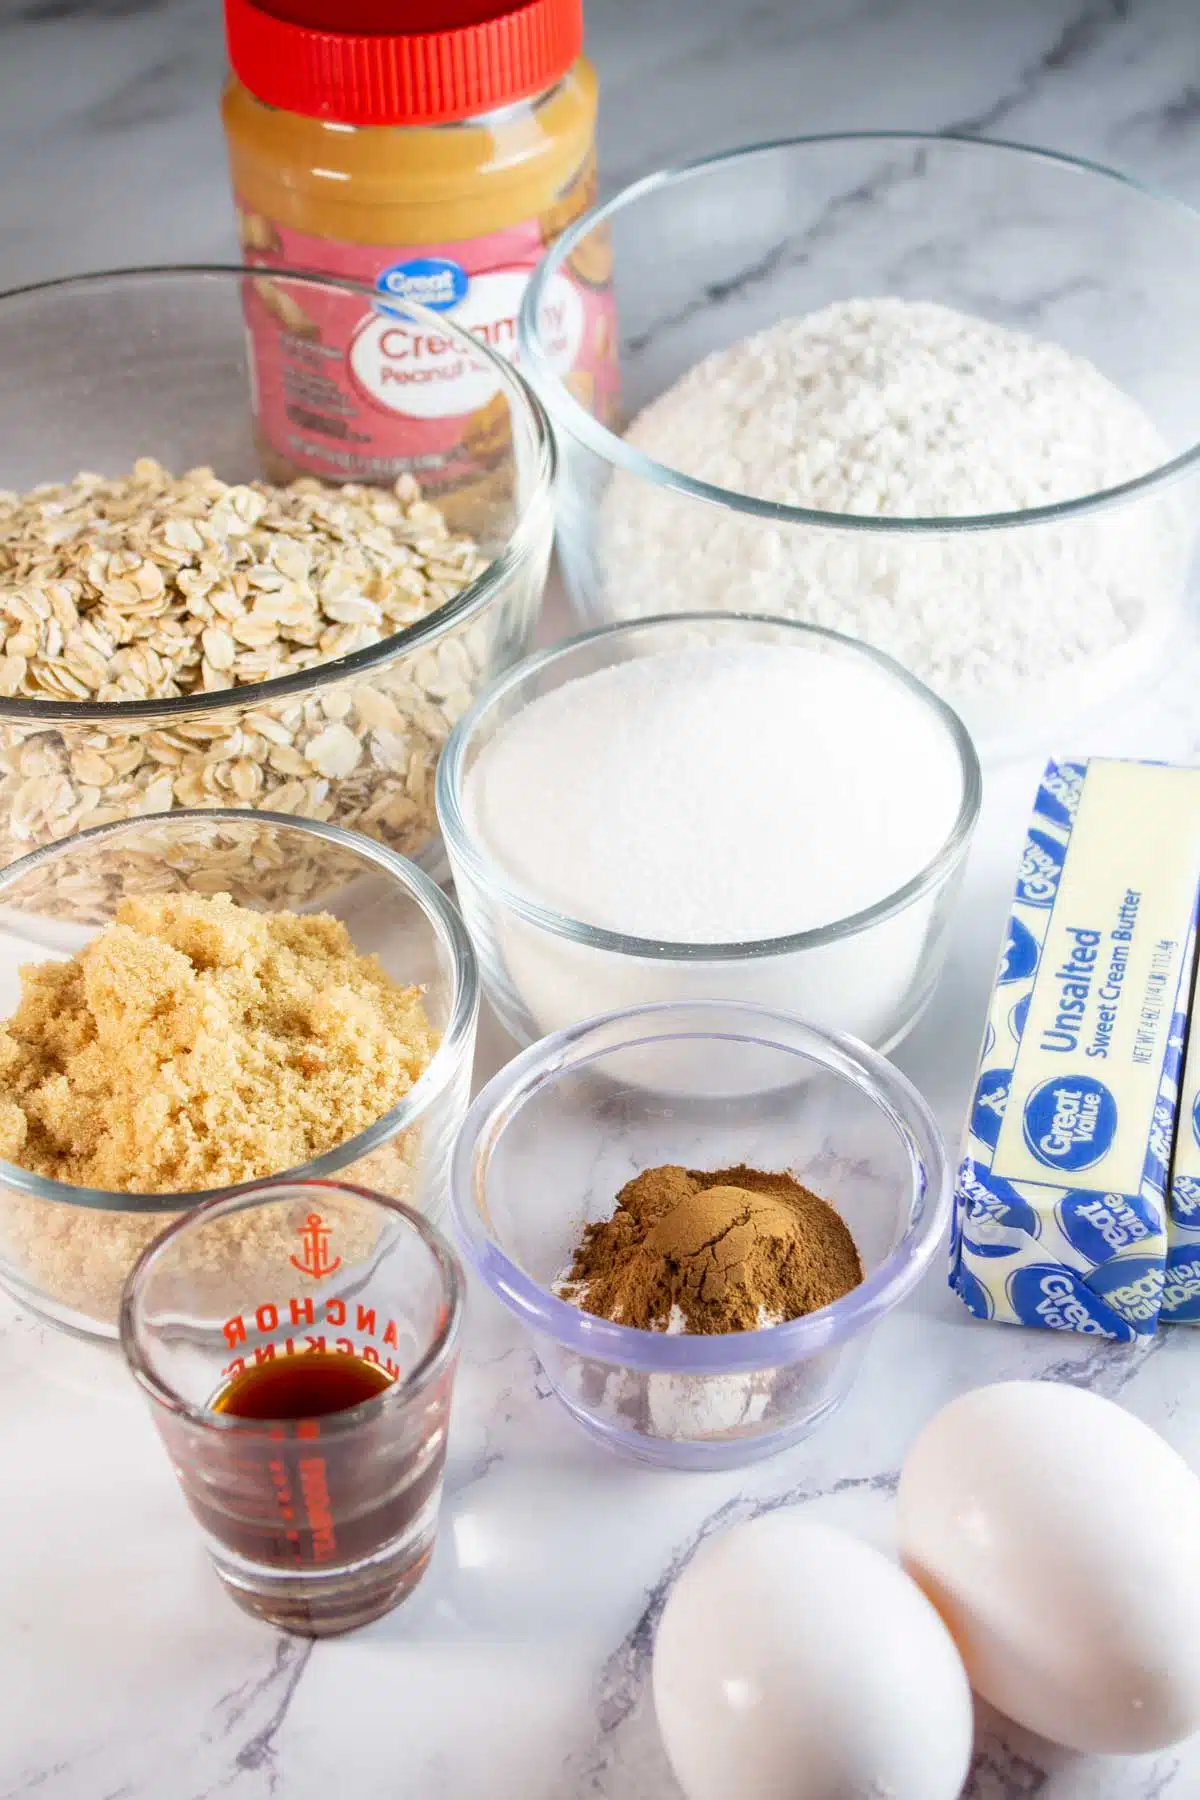 Tall image of ingredients needed for oatmeal peanut butter cookies.